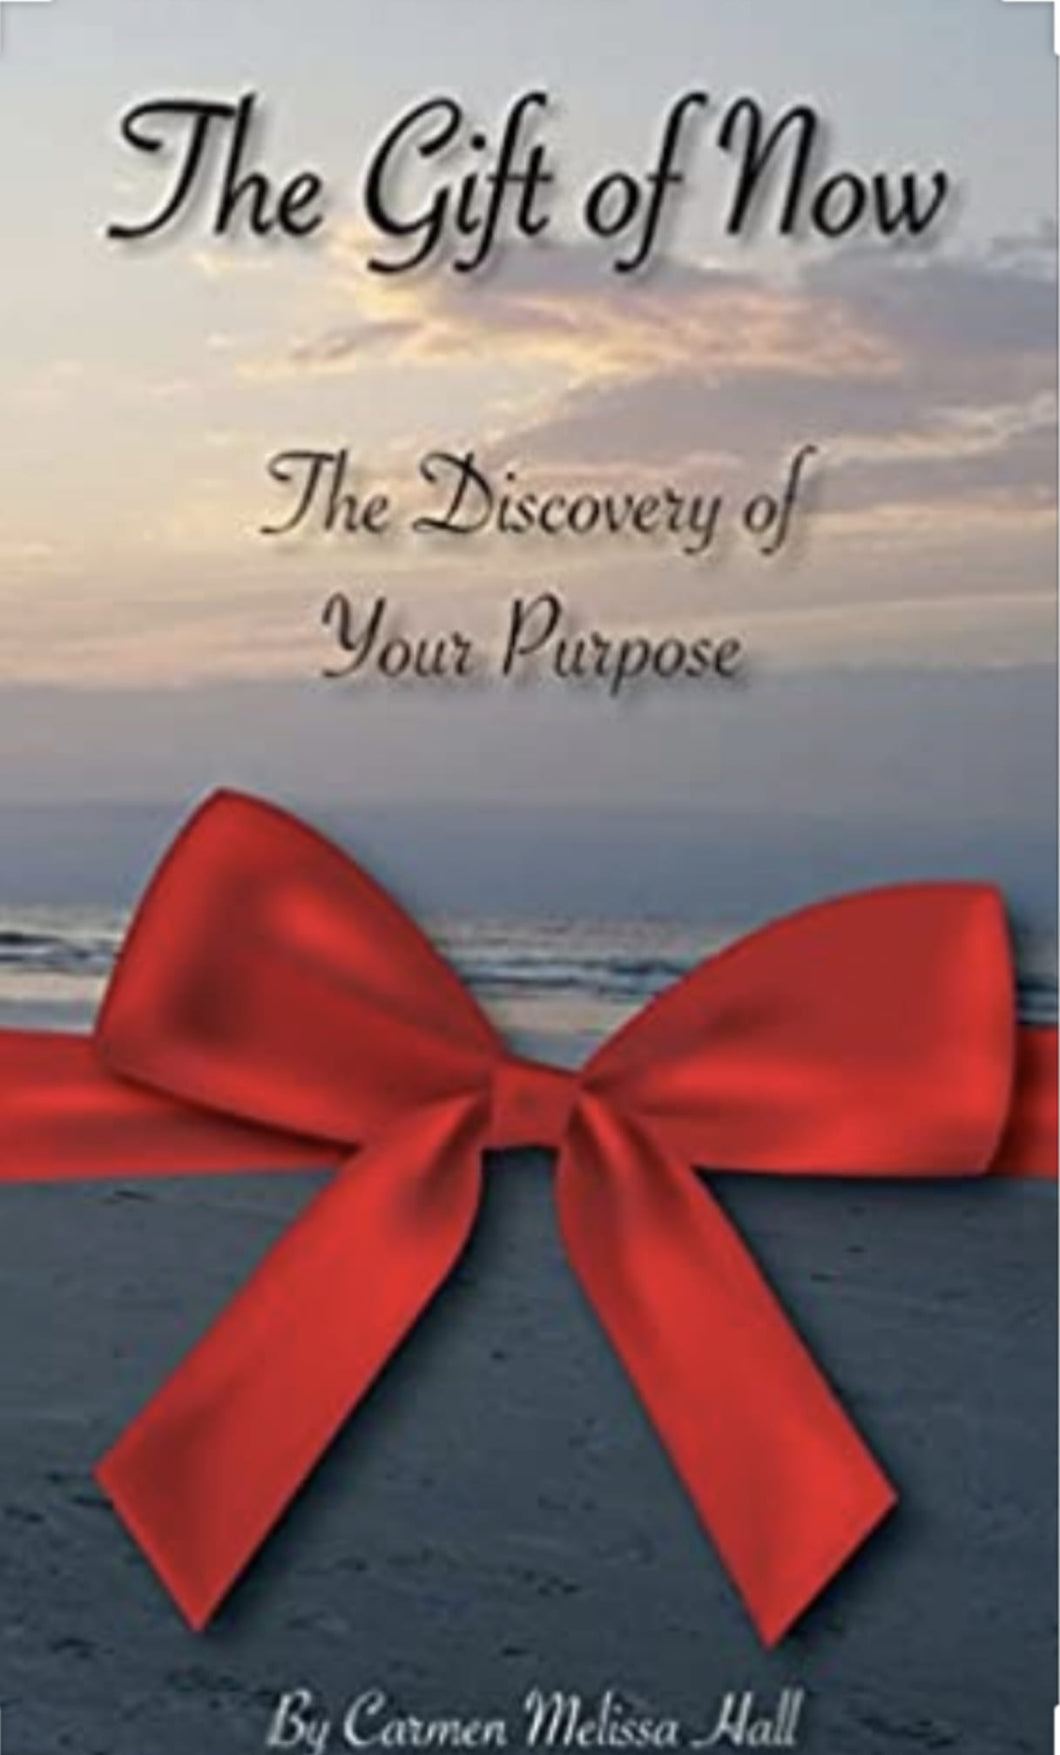 The Gift of Now, the discovery of your purpose